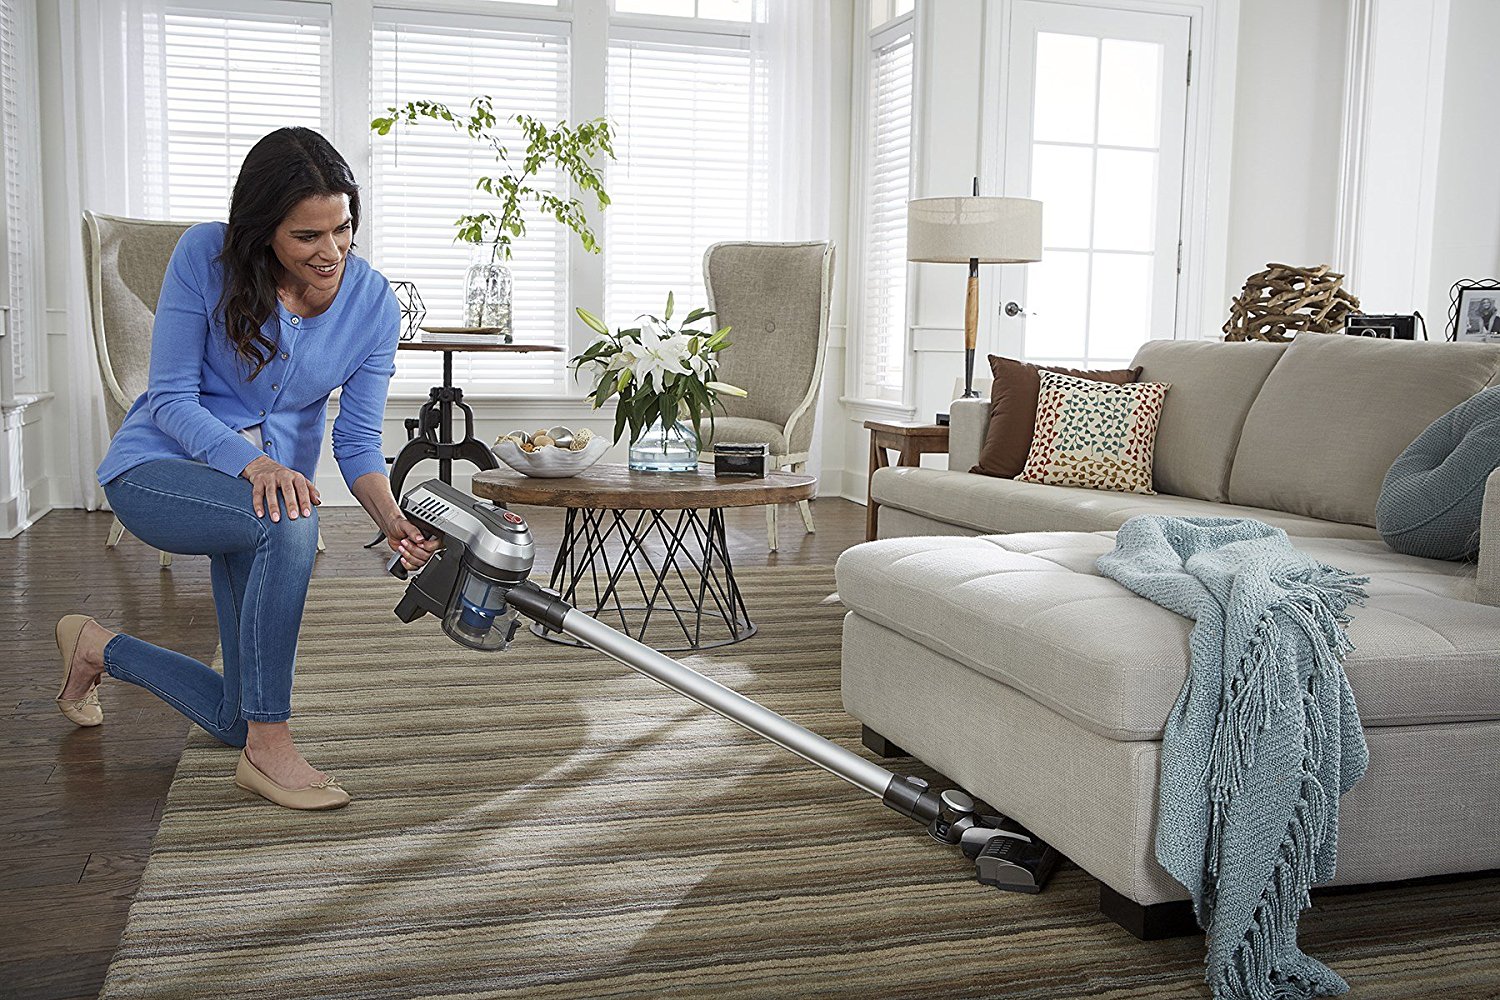 Hoover Cruise Bagless Cordless Stick Vacuum - More Than Vacuums